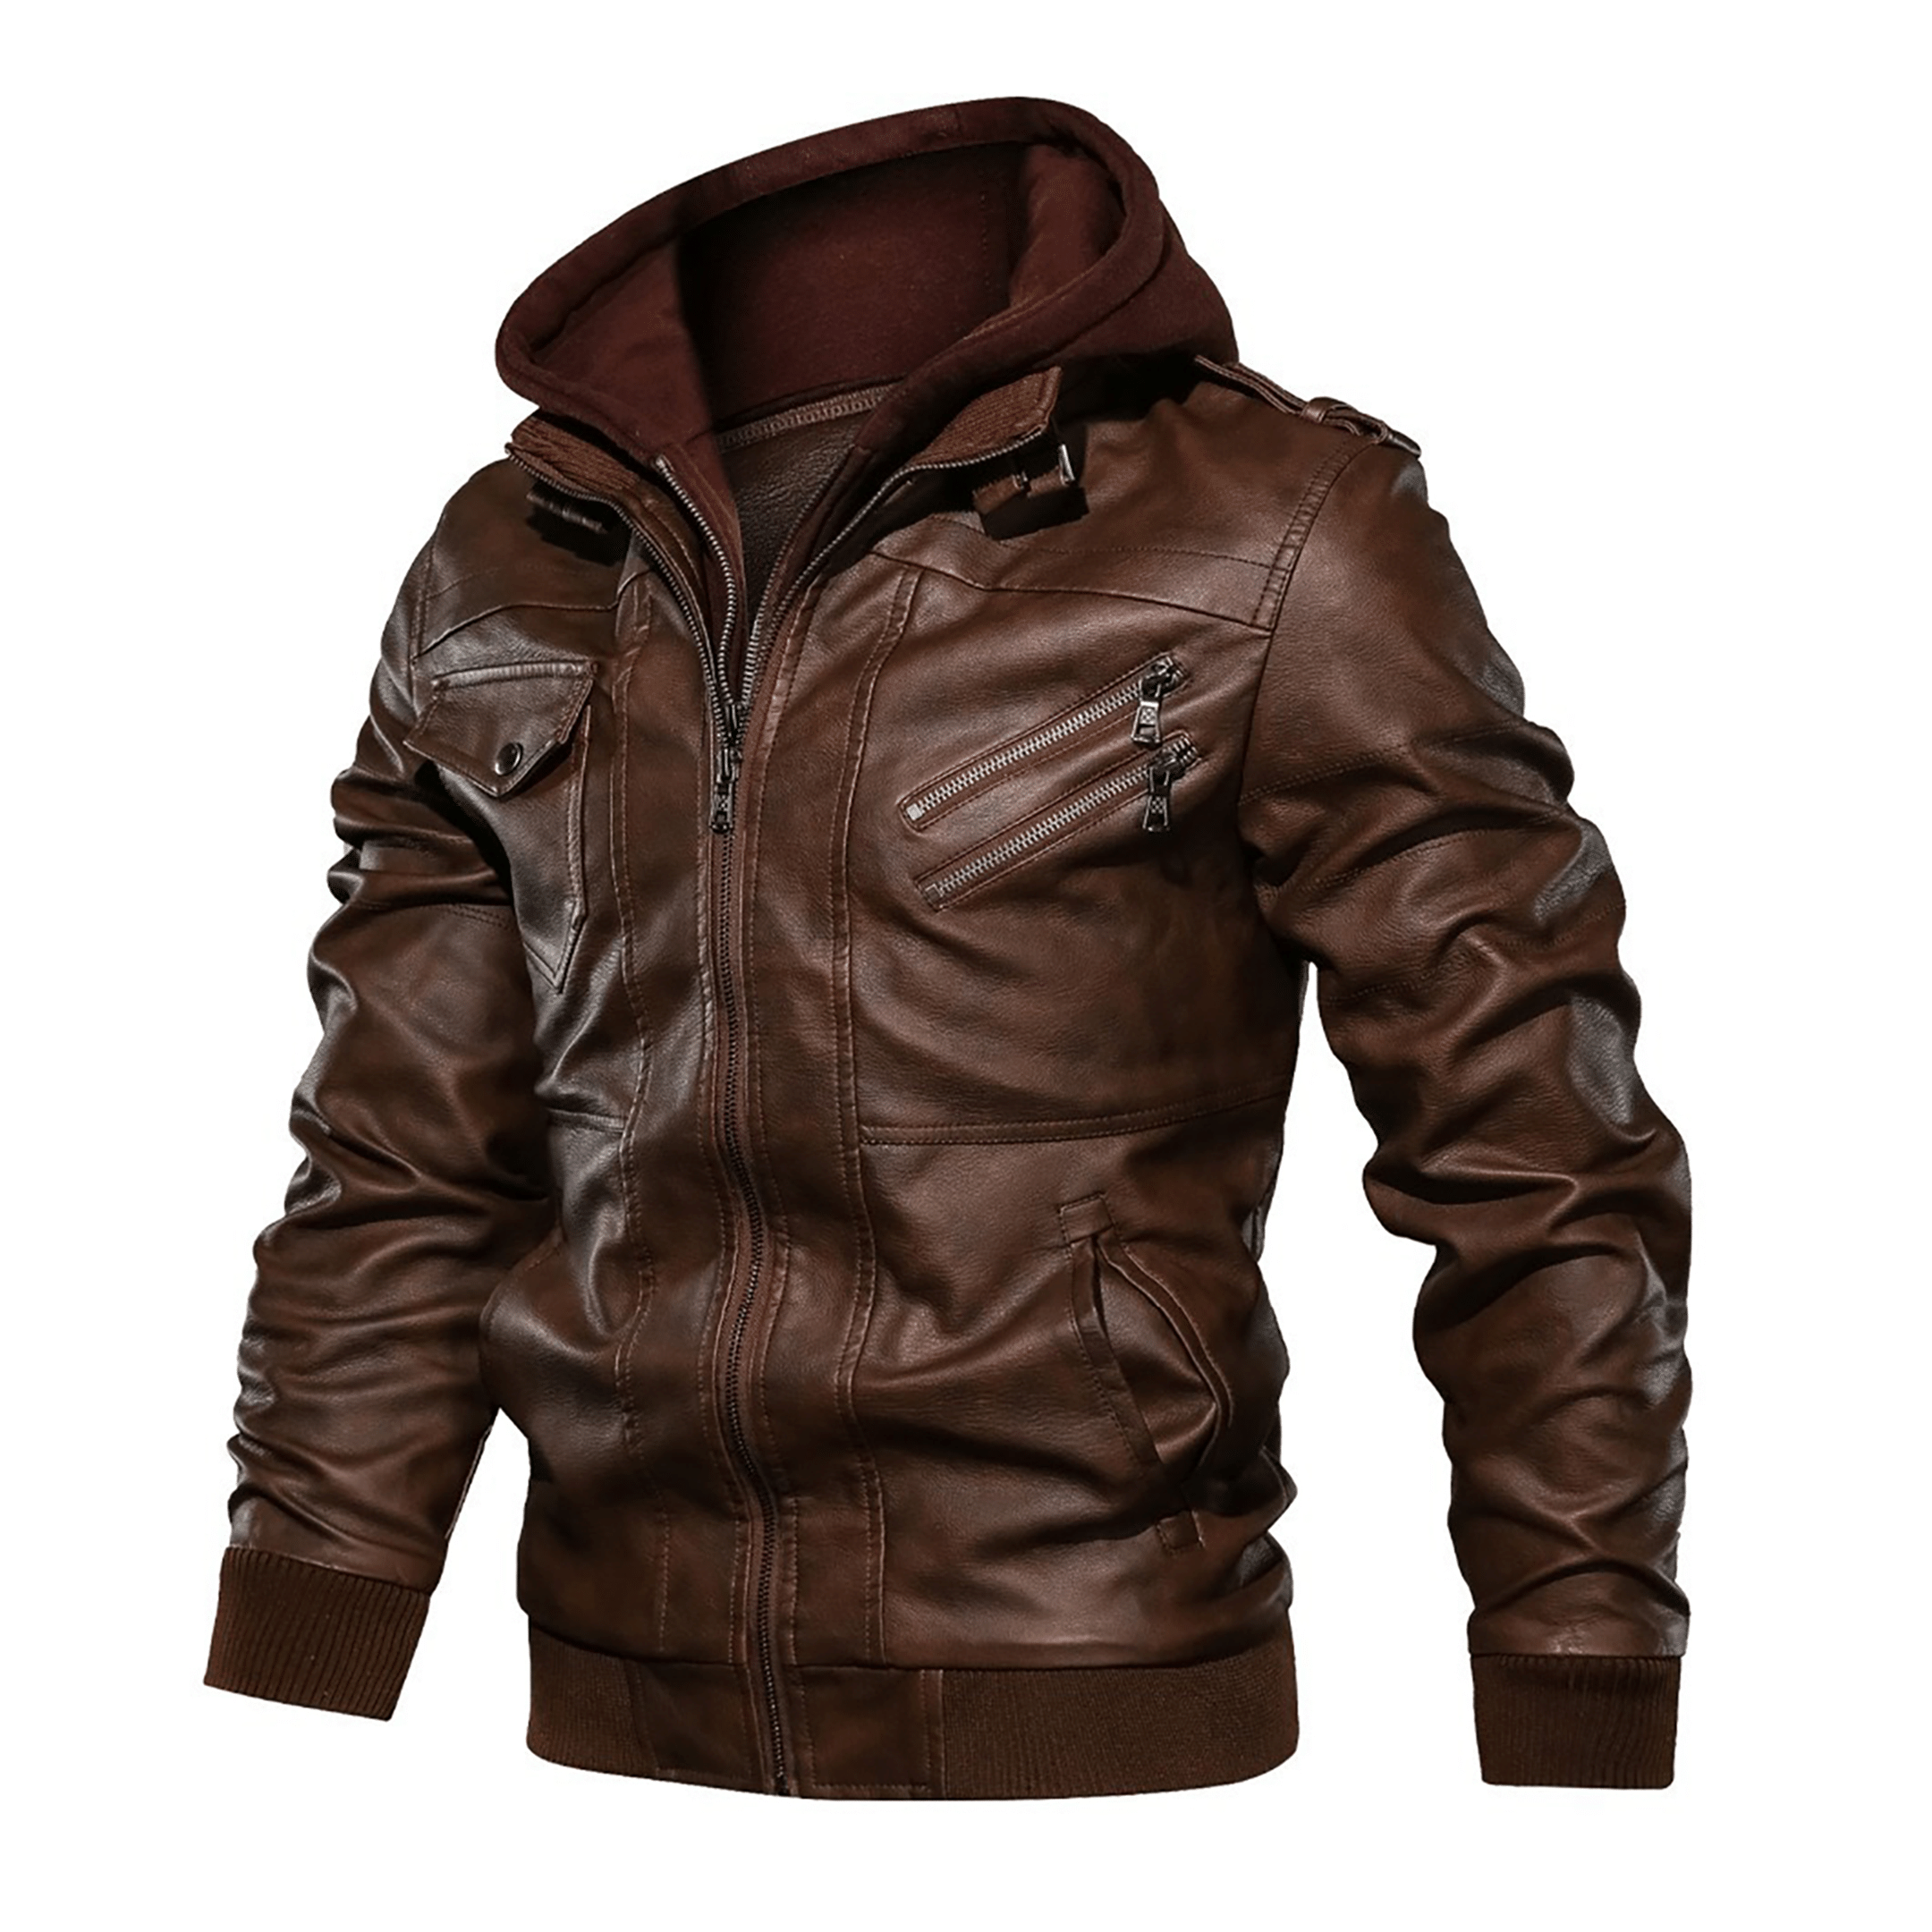 Top leather jackets and latest products 143